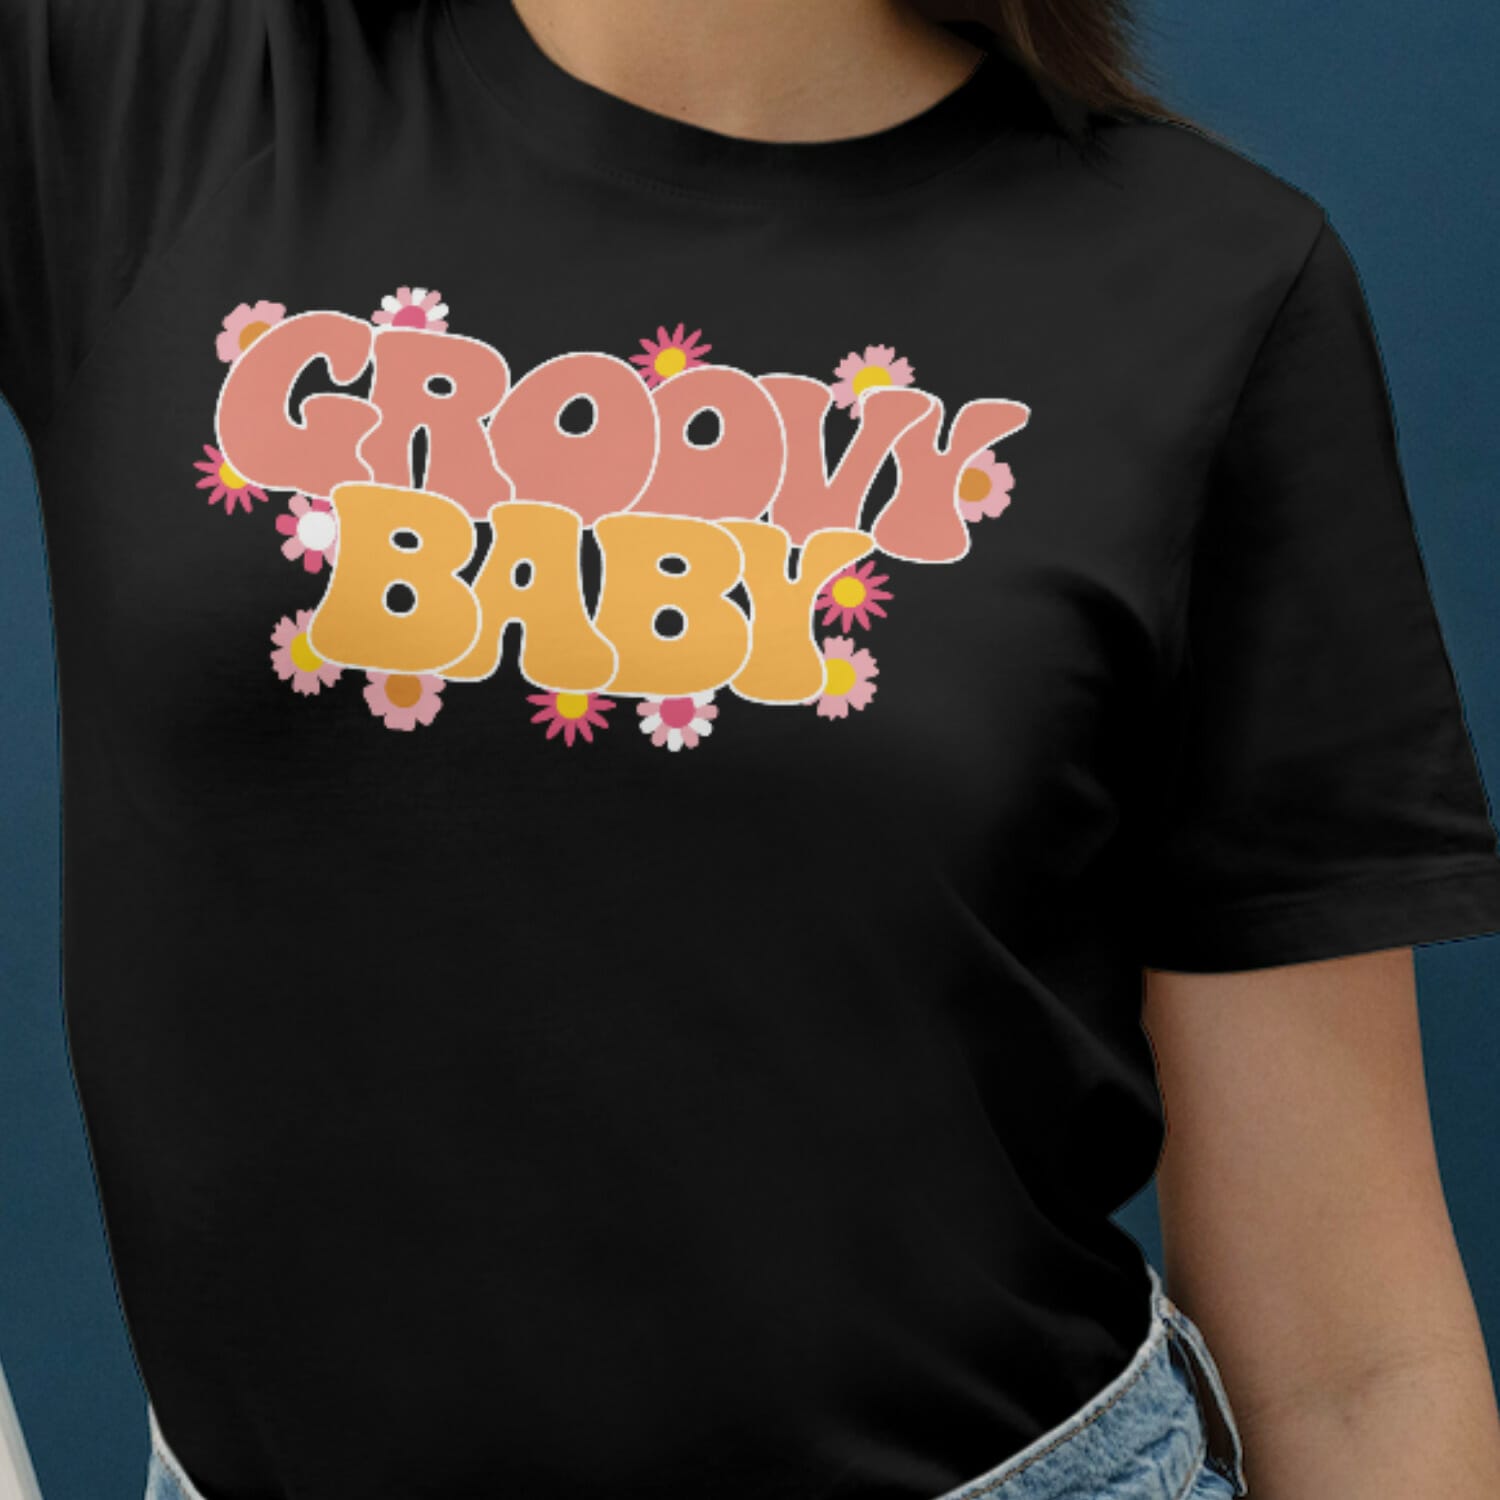 Groovy baby with flowers T shirt design